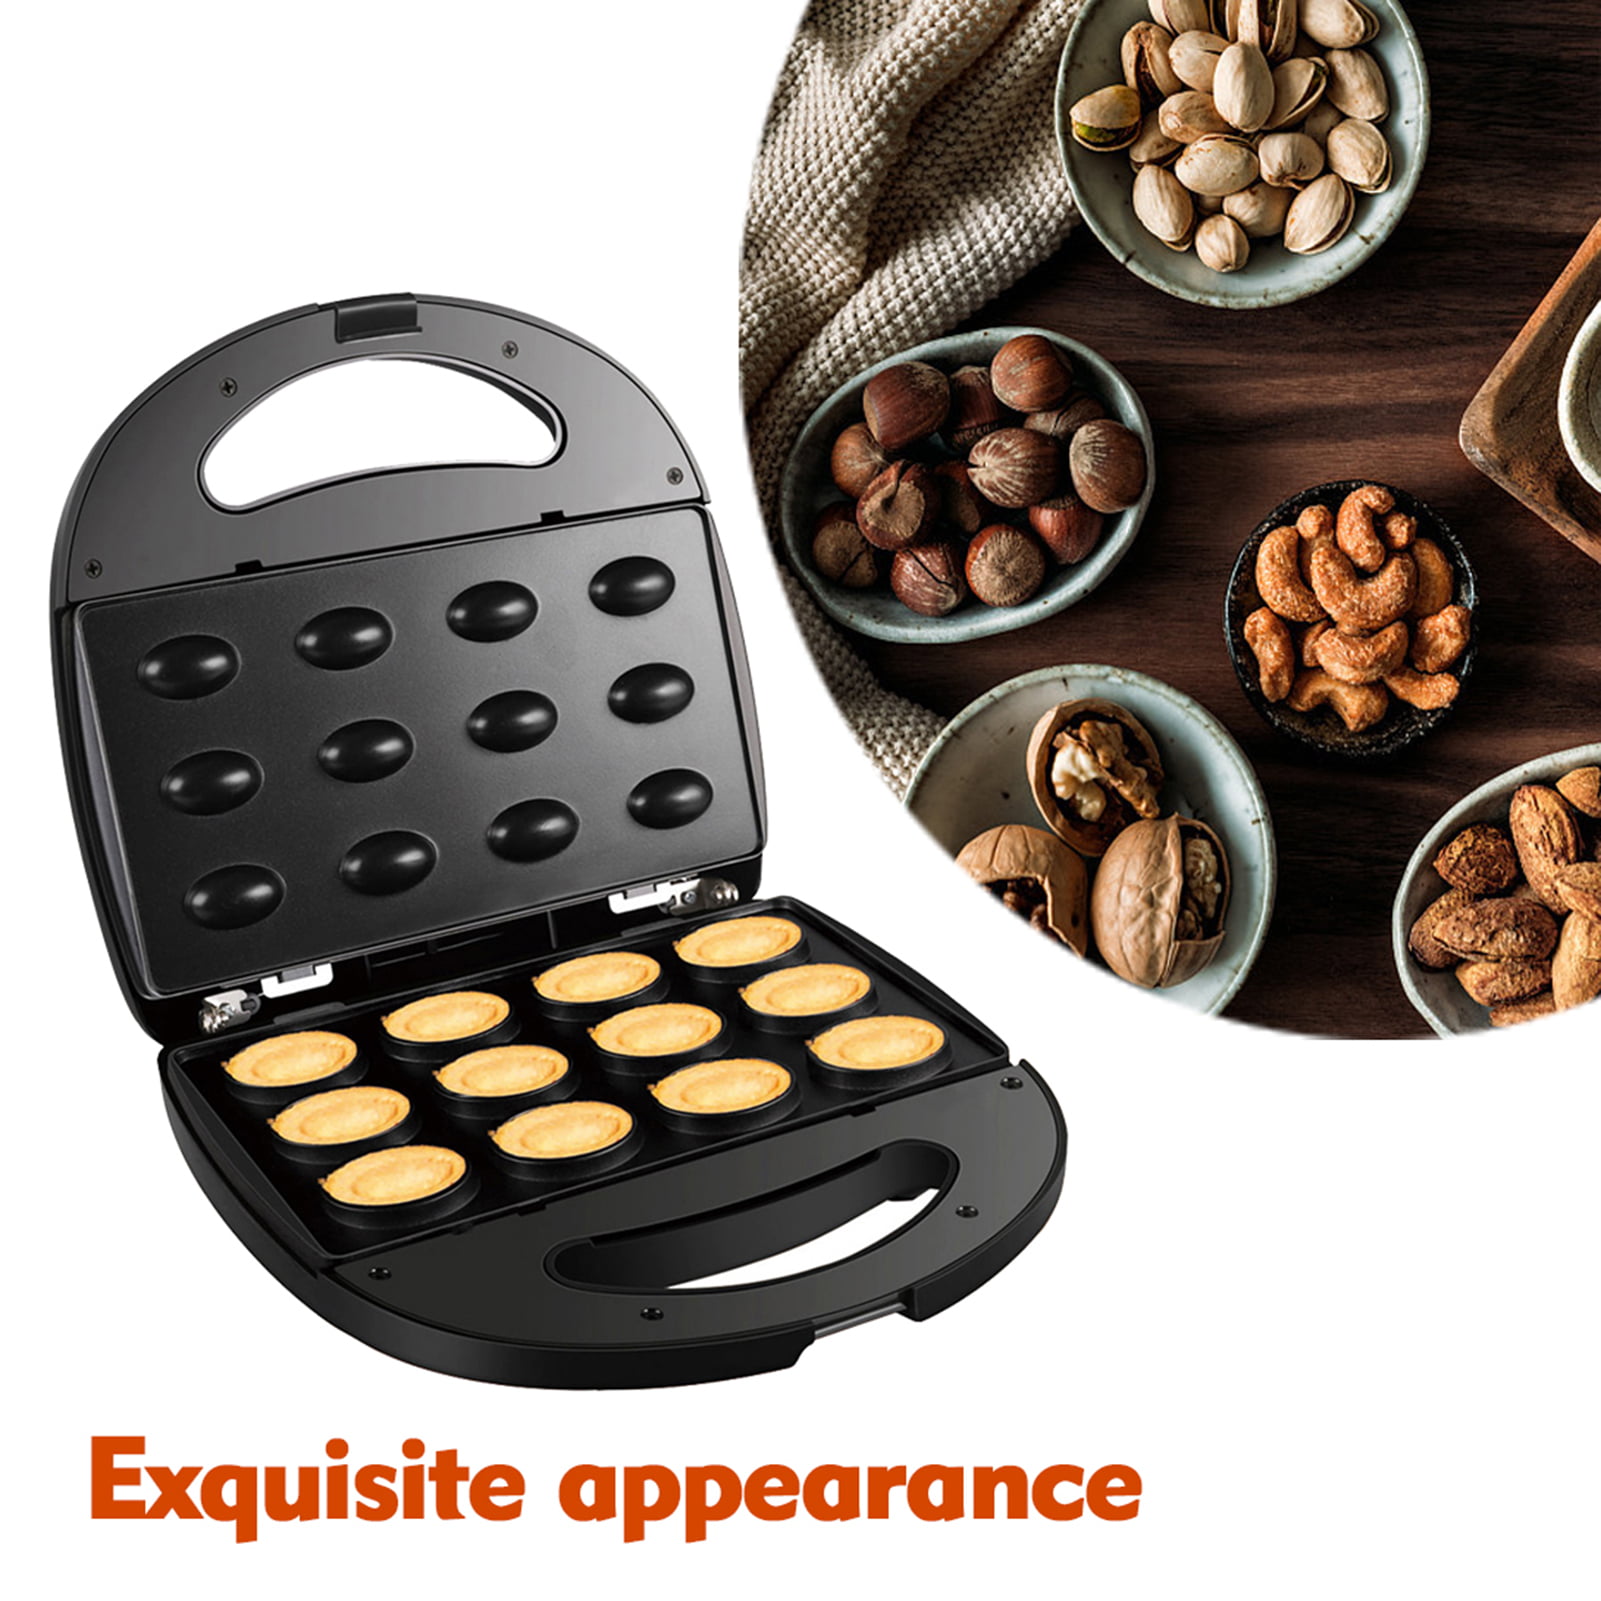 UK-Plug 1400w Double‑Side Electric Walnut Cookie Maker 11.8x3.7x10.2in Nuts Skillet with Non‑Stick Coating for Making Nuts Snack Biscuits Small Cakes Breakfast Machine